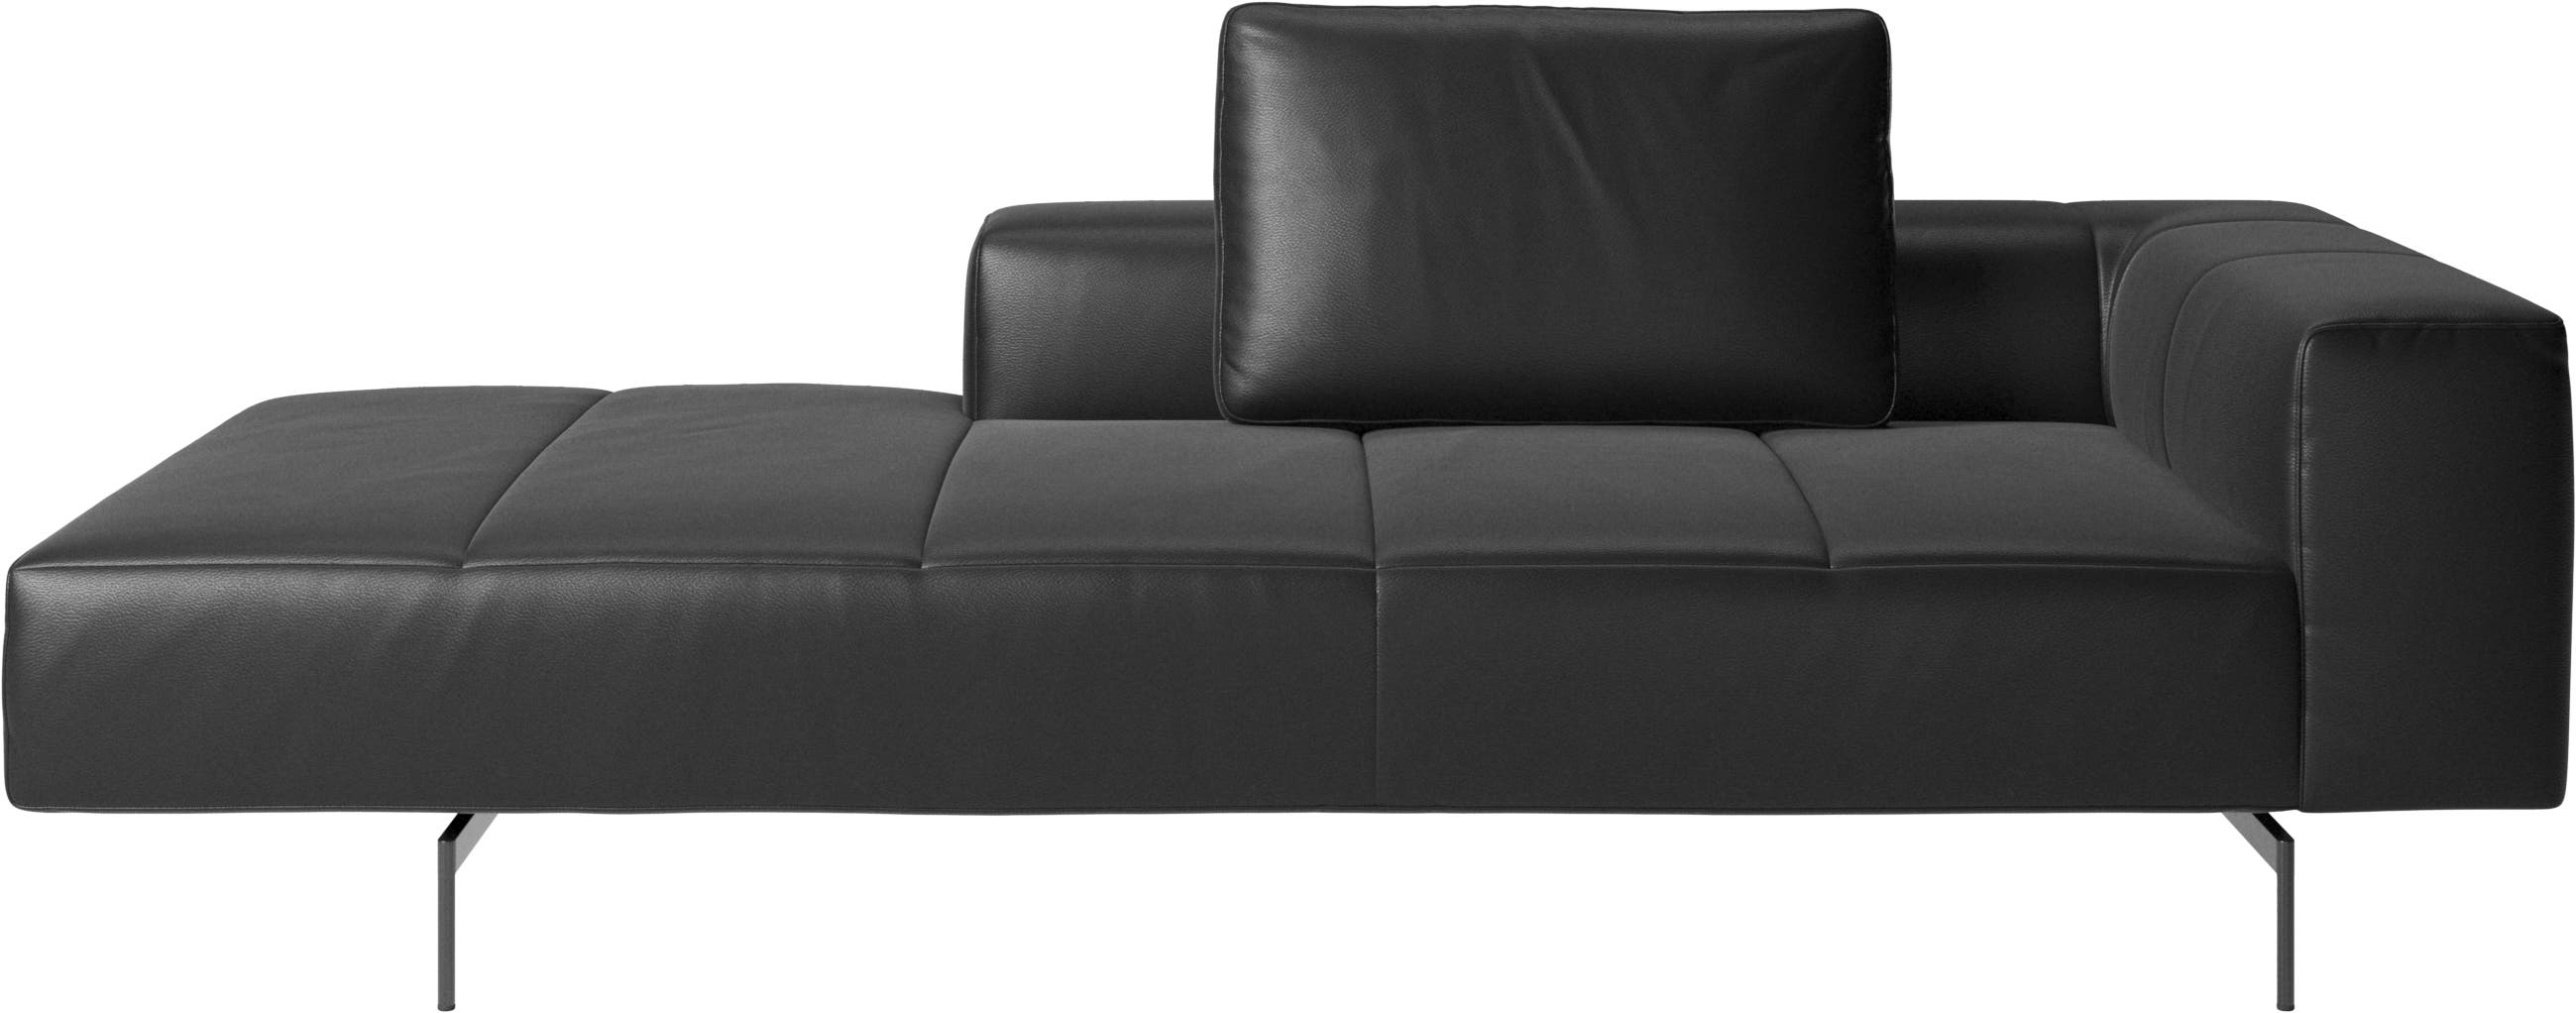 Amsterdam Iounging module for sofa, armrest right, open end left